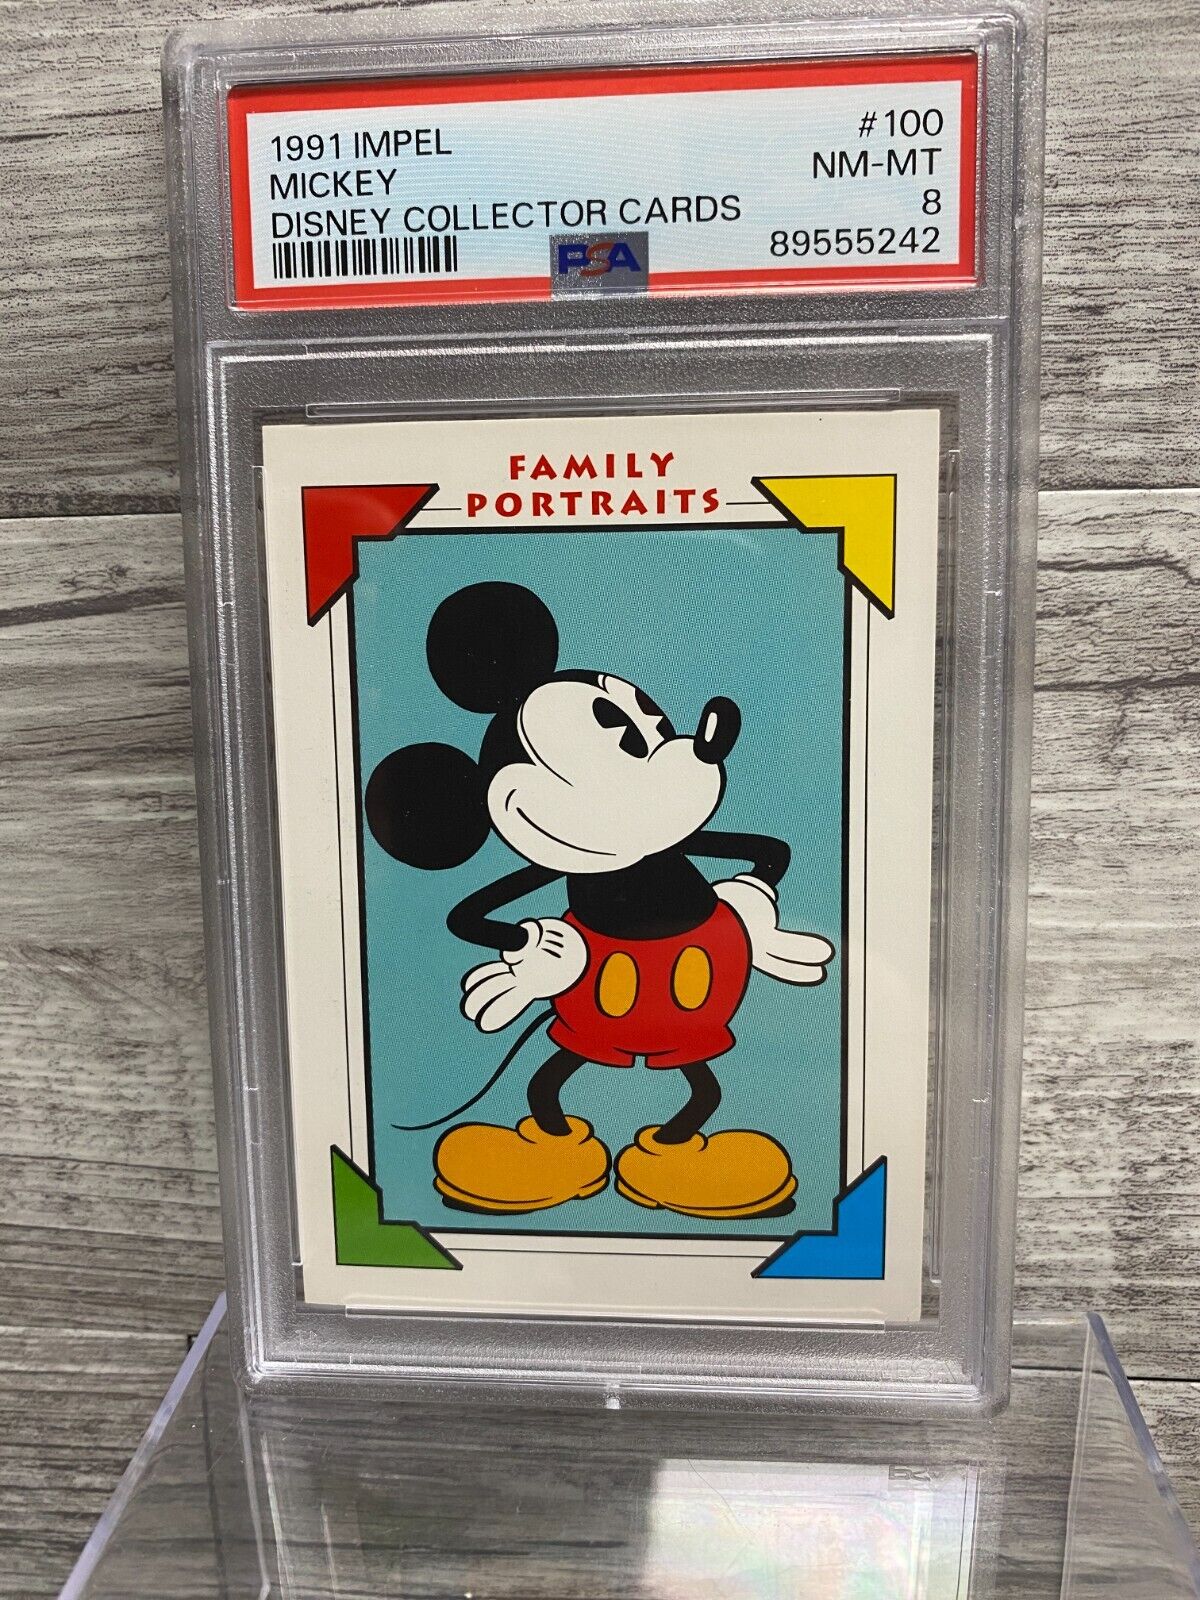 1991 Impel Disney Collector Cards Mickey Mouse PSA 8 MINT #100 Family Portraits